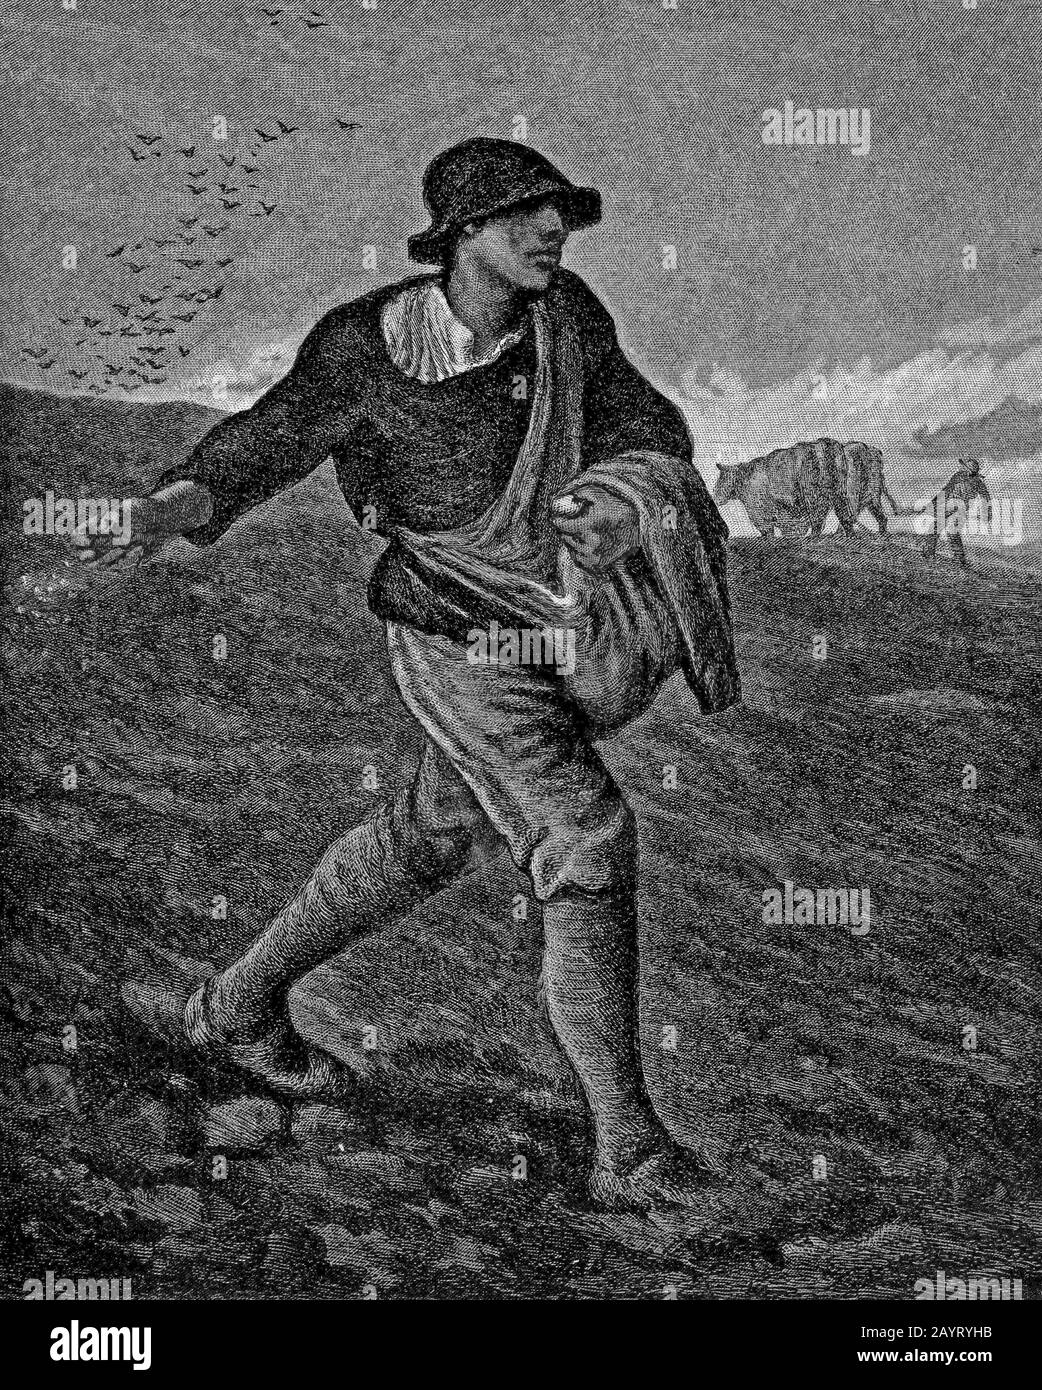 illustration of the painting titled 'The Sower' by Jean-François Millet (1814-1875) a French painter and one of the founders of the Barbizon School. Millet is noted for his scenes of peasant farmers and is categorized as part of the Realism art movement. Stock Photo